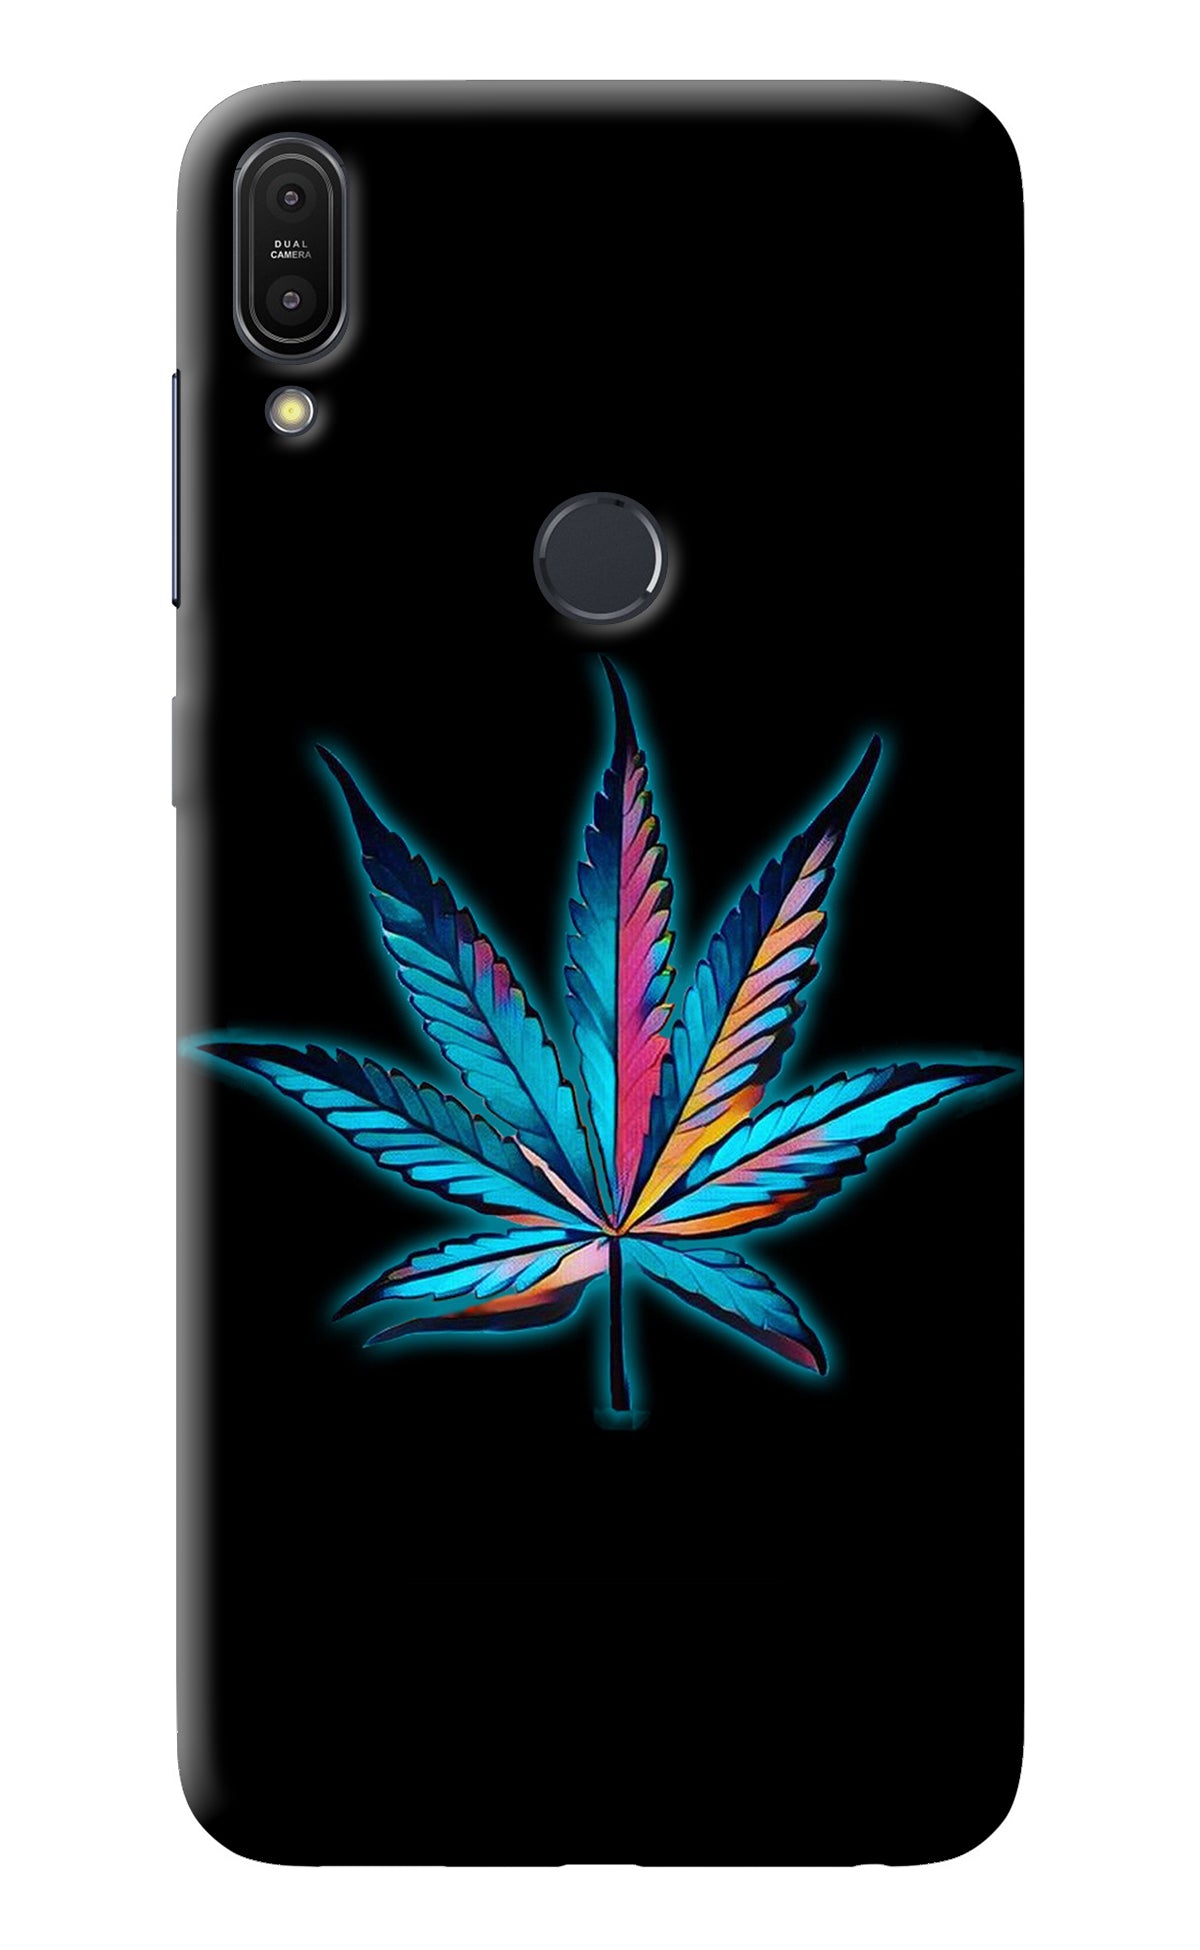 Weed Asus Zenfone Max Pro M1 Back Cover